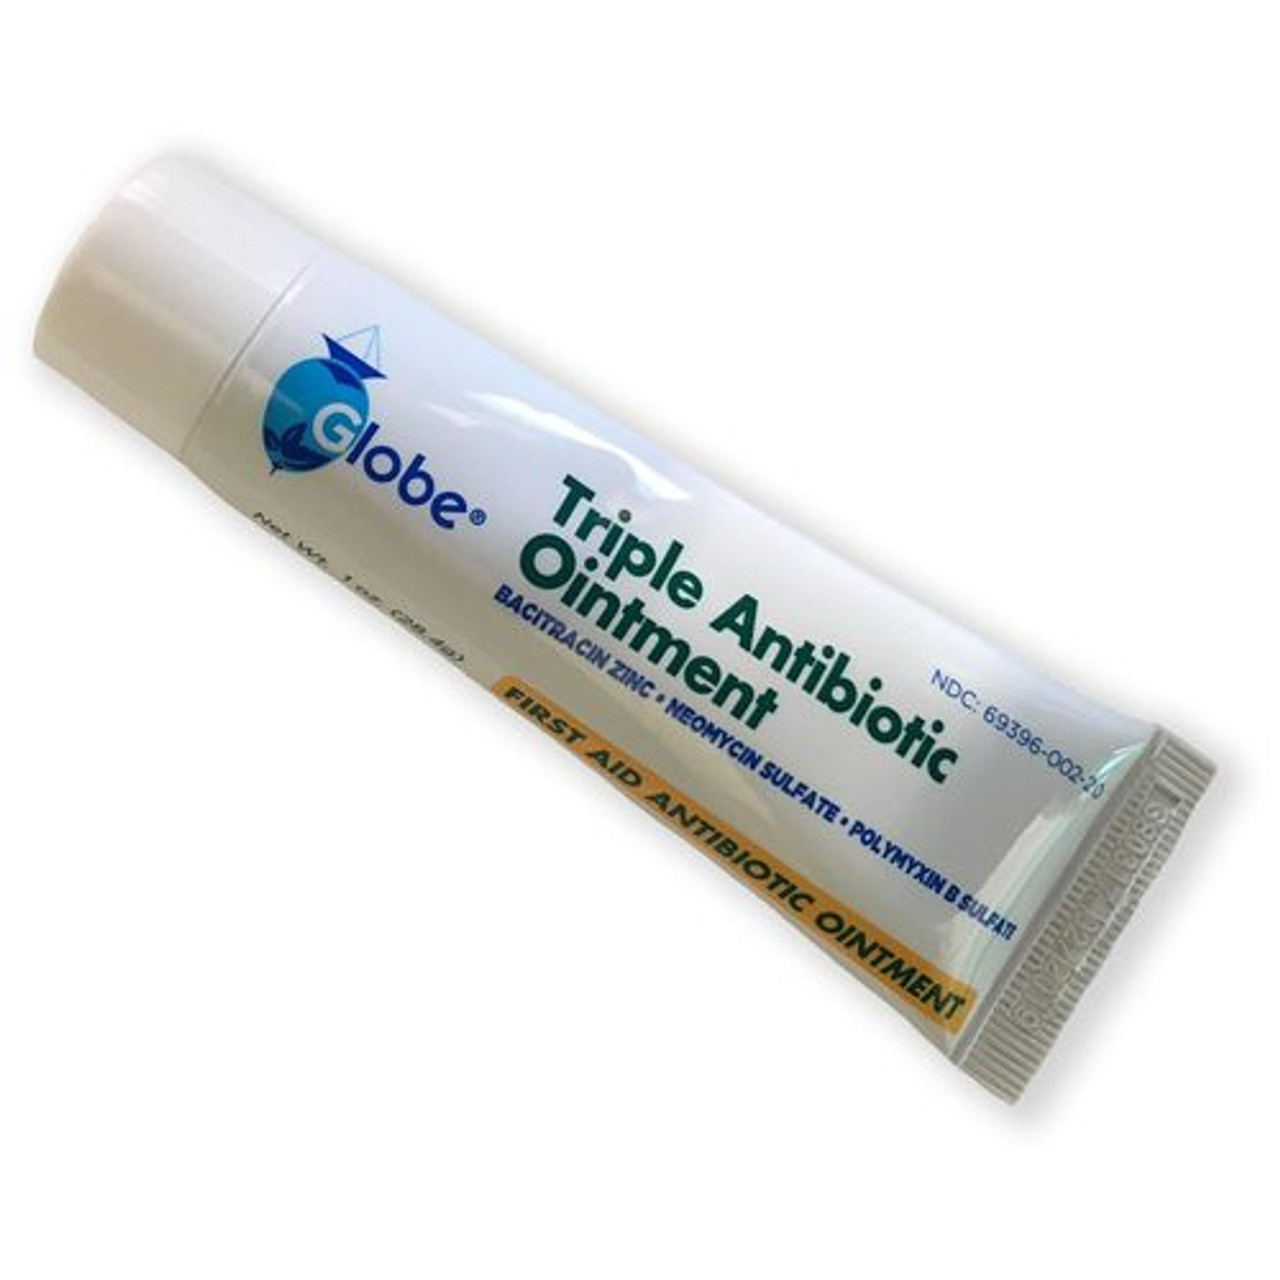 can.anitbiotic eye ointment change.dogs eue cplot